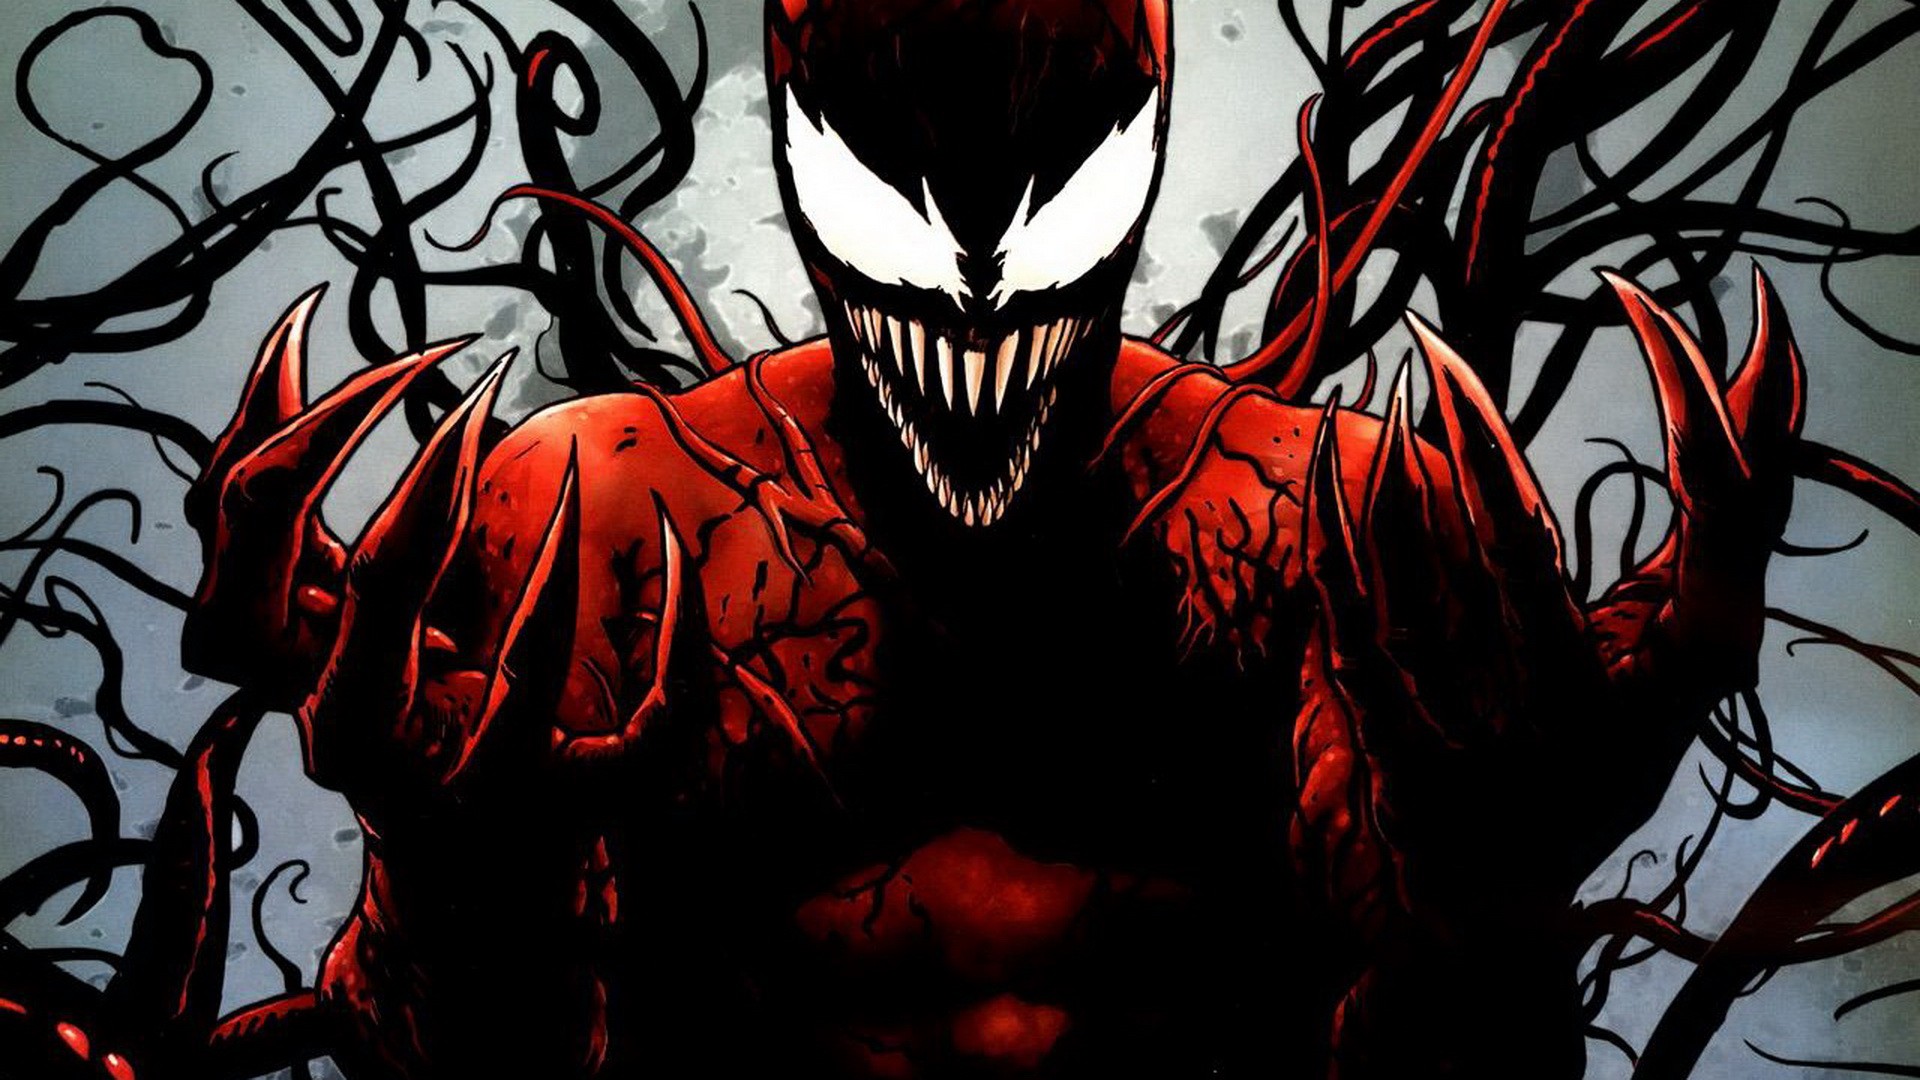 Carnage Wallpapers and Background Images   stmednet